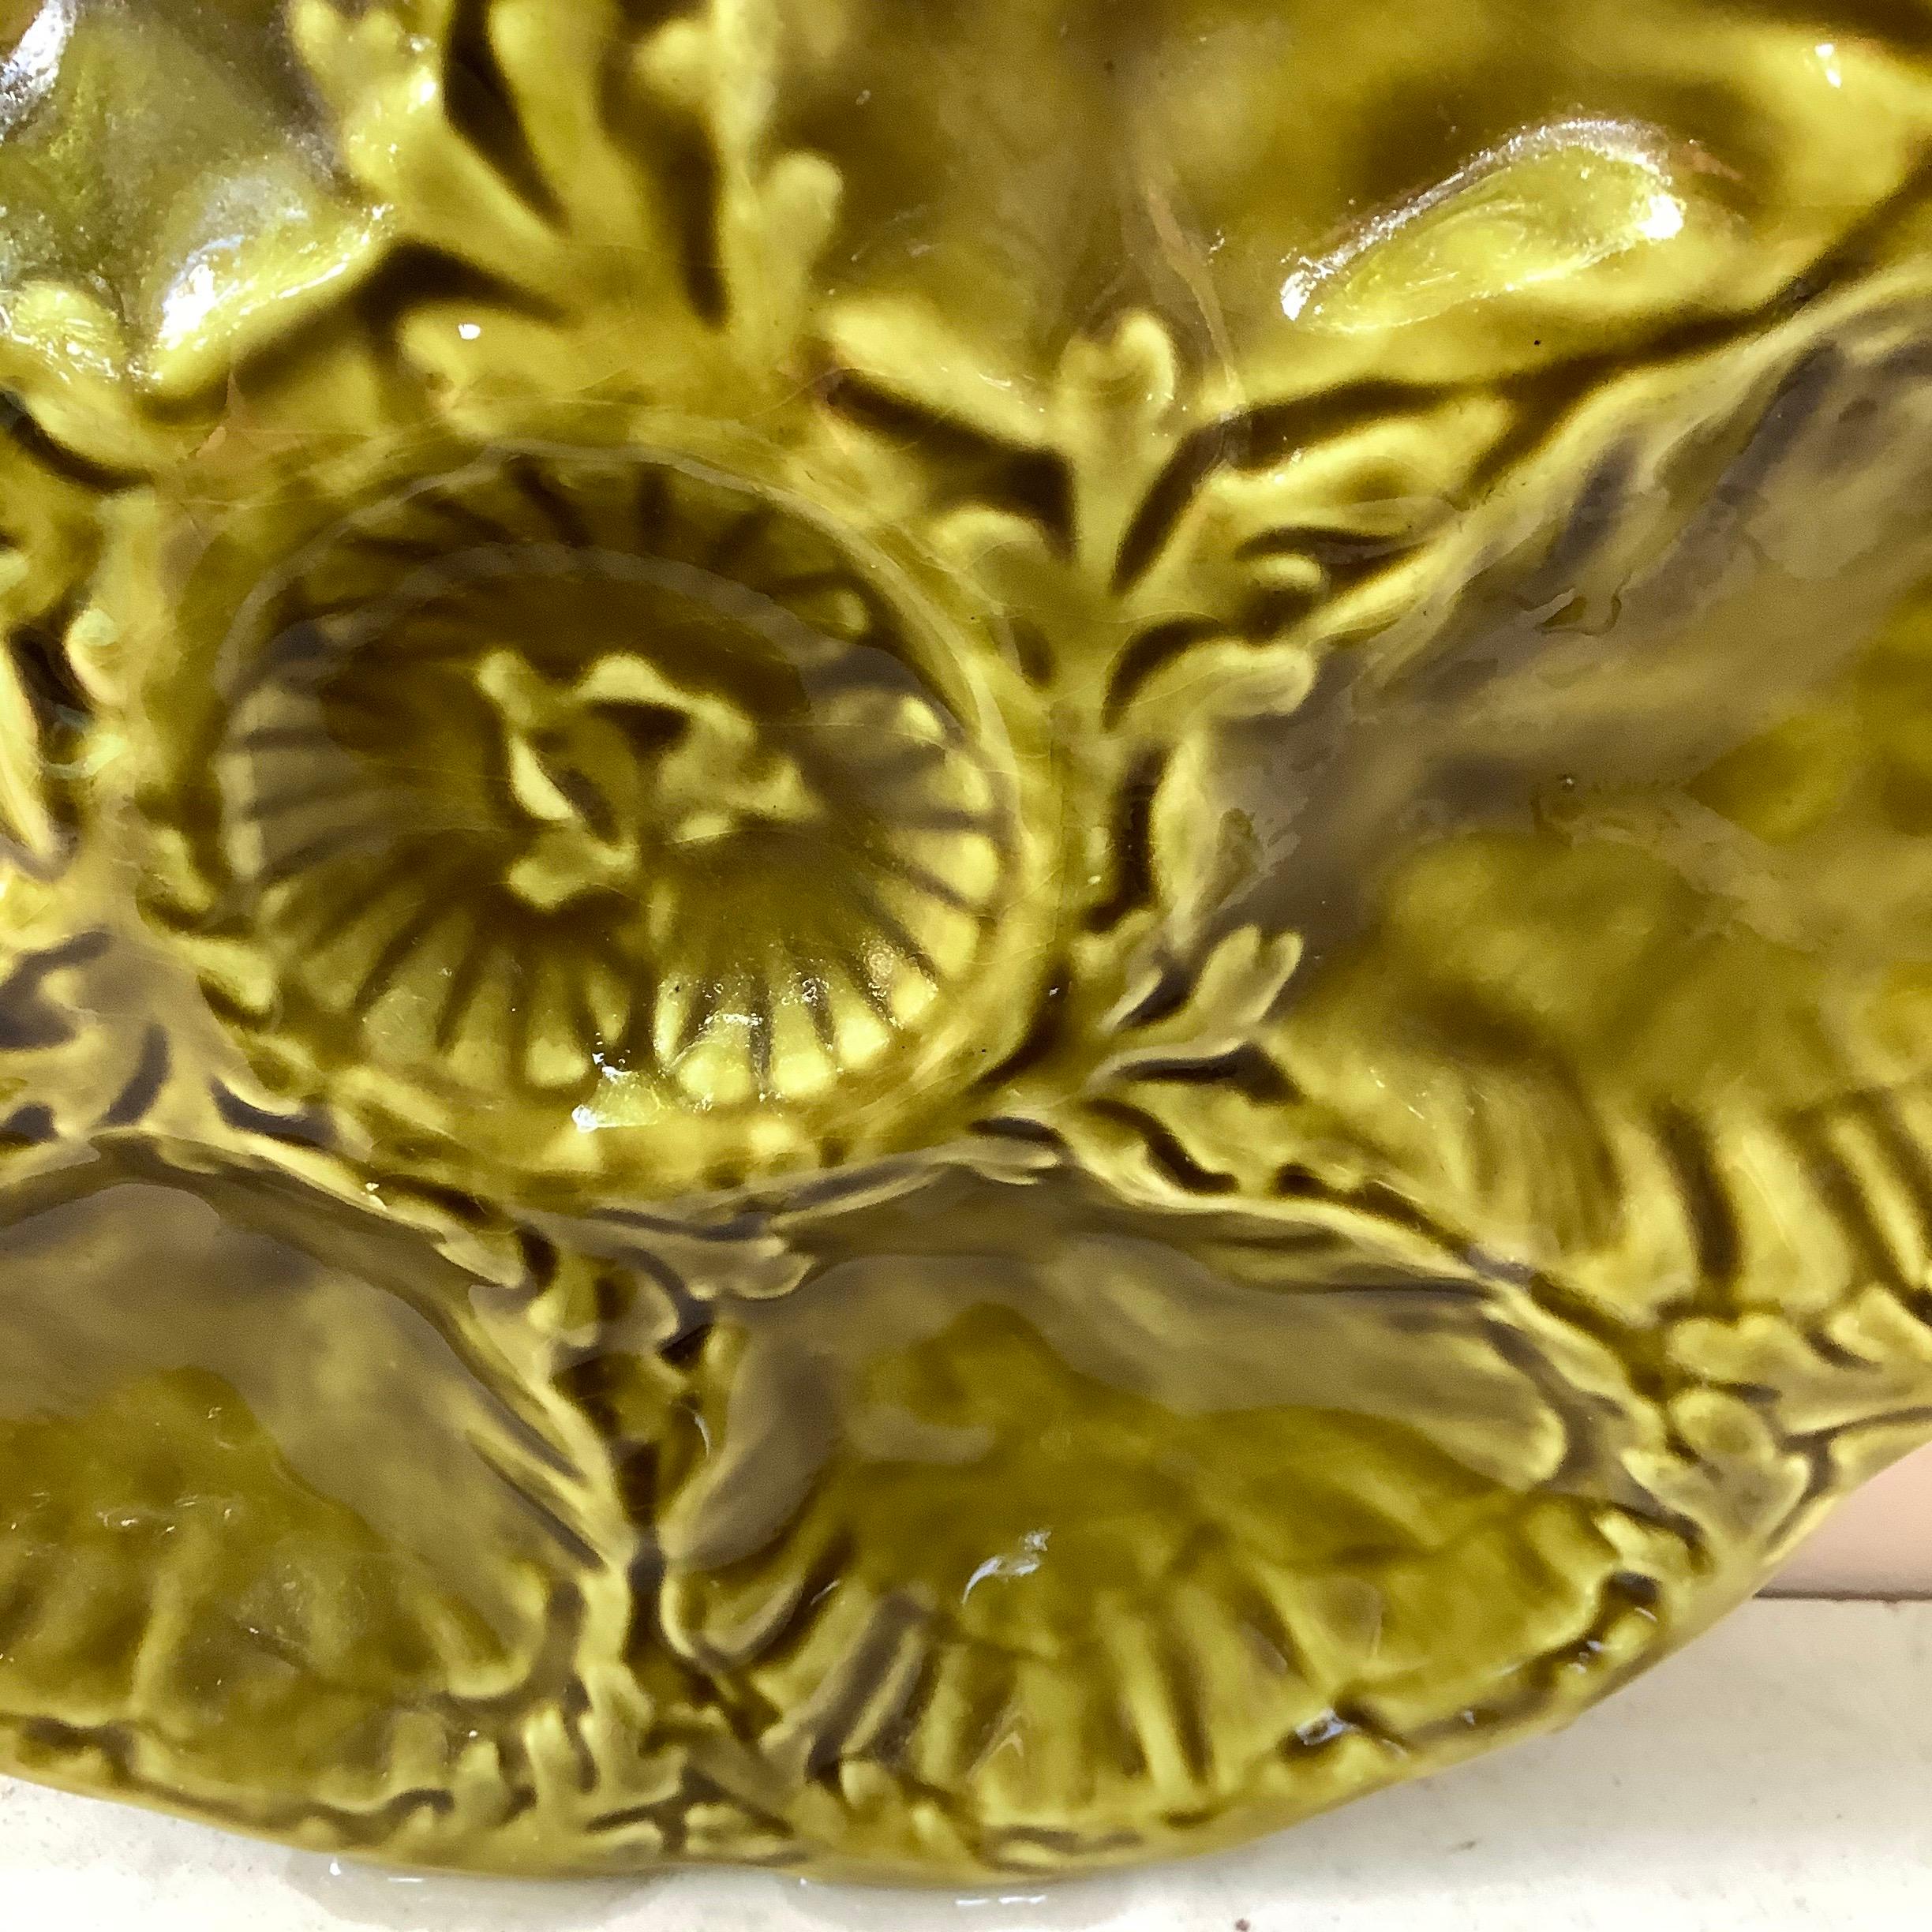 Majolica Oyster Plate signed Gien, circa 1950.
6 plates are available.